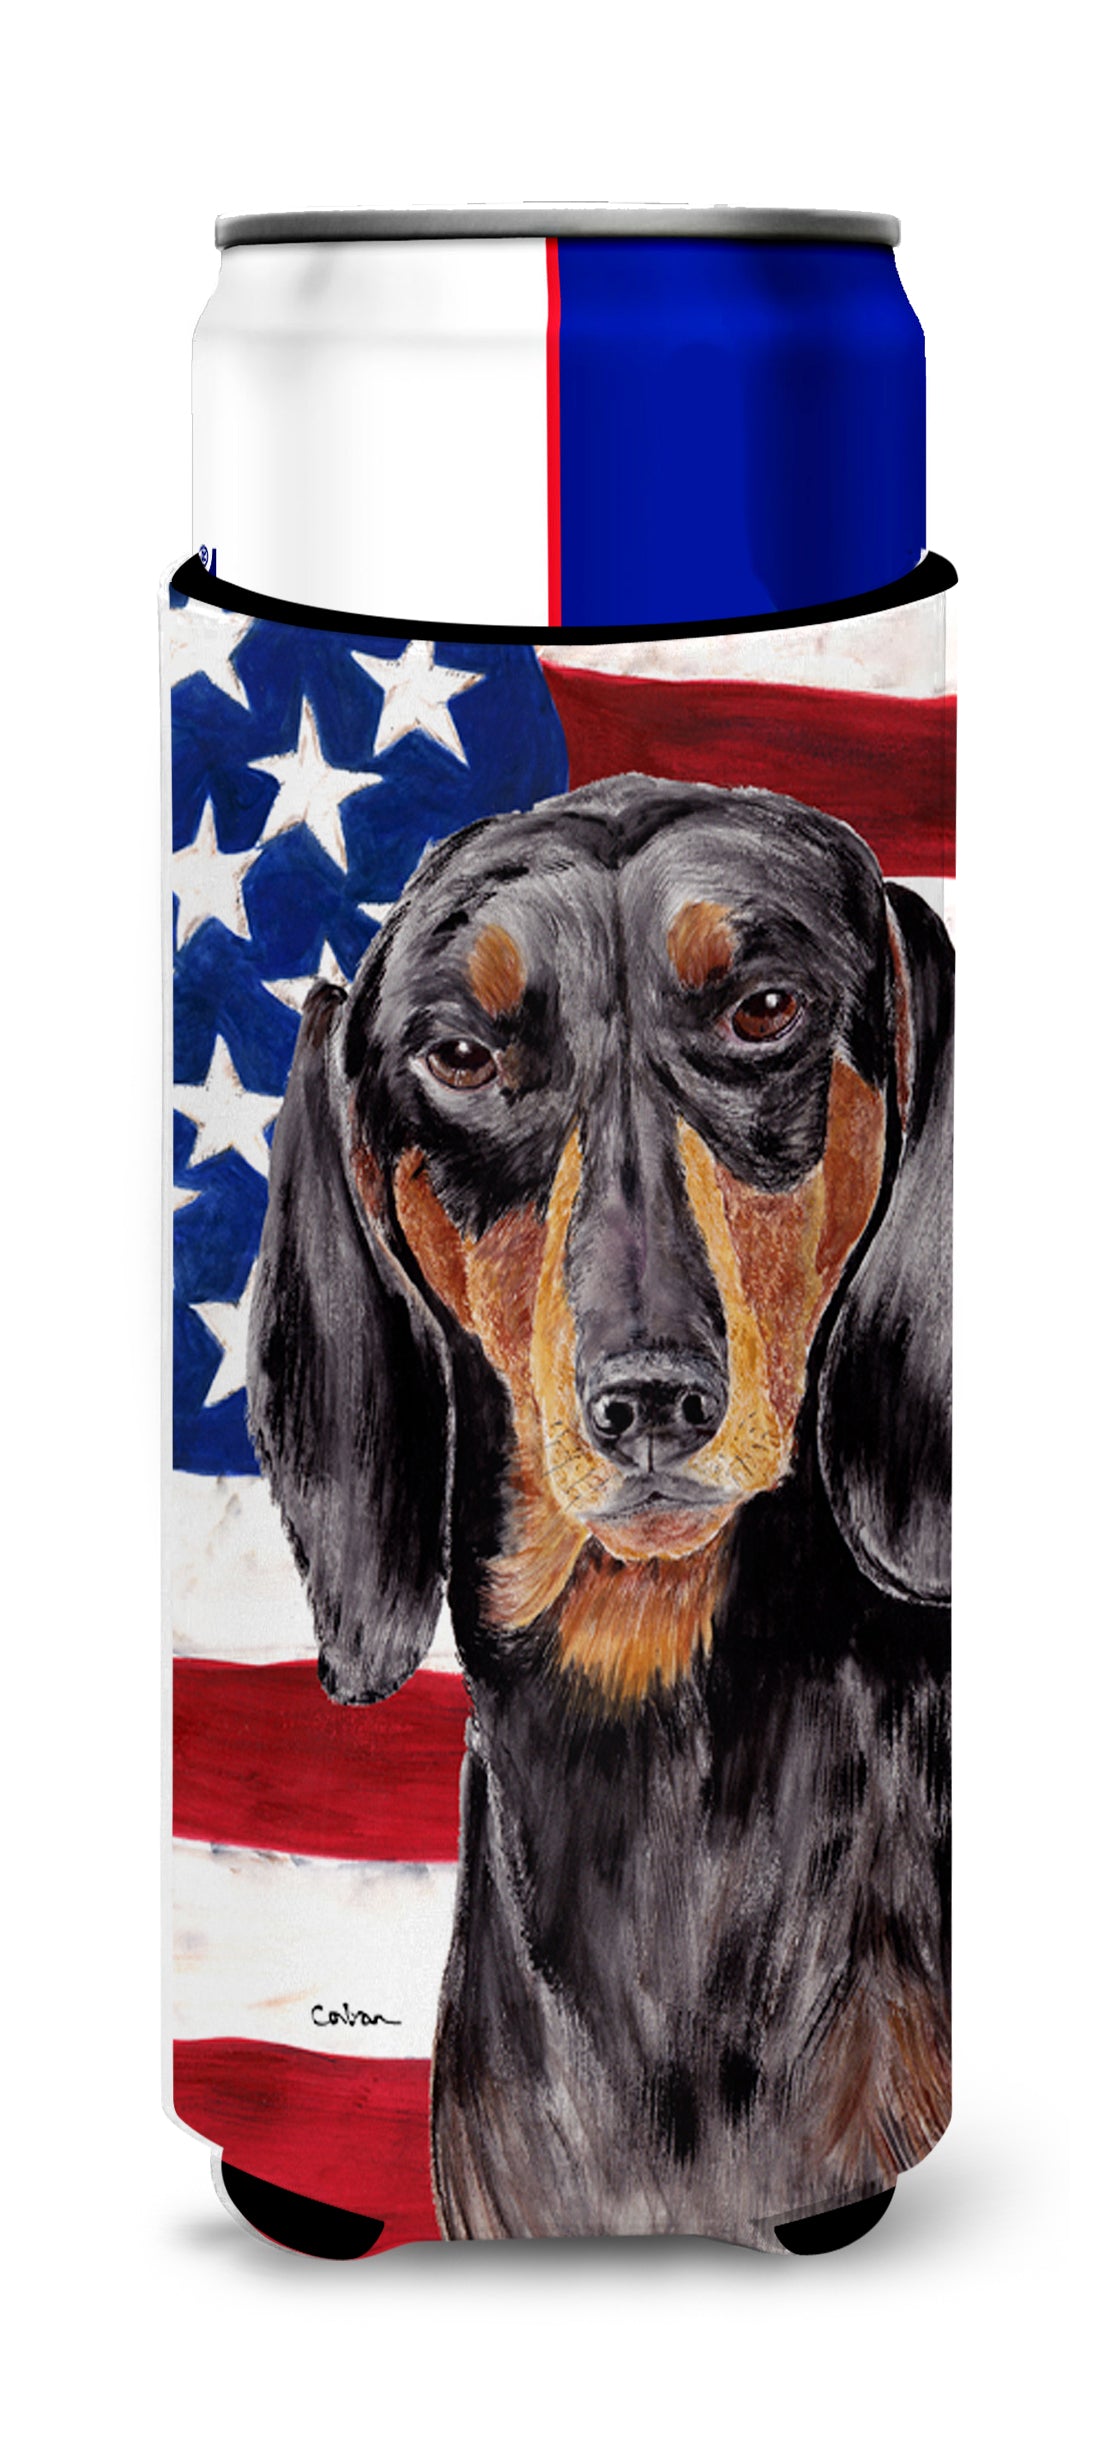 USA American Flag with Dachshund Ultra Beverage Insulators for slim cans SC9003MUK.